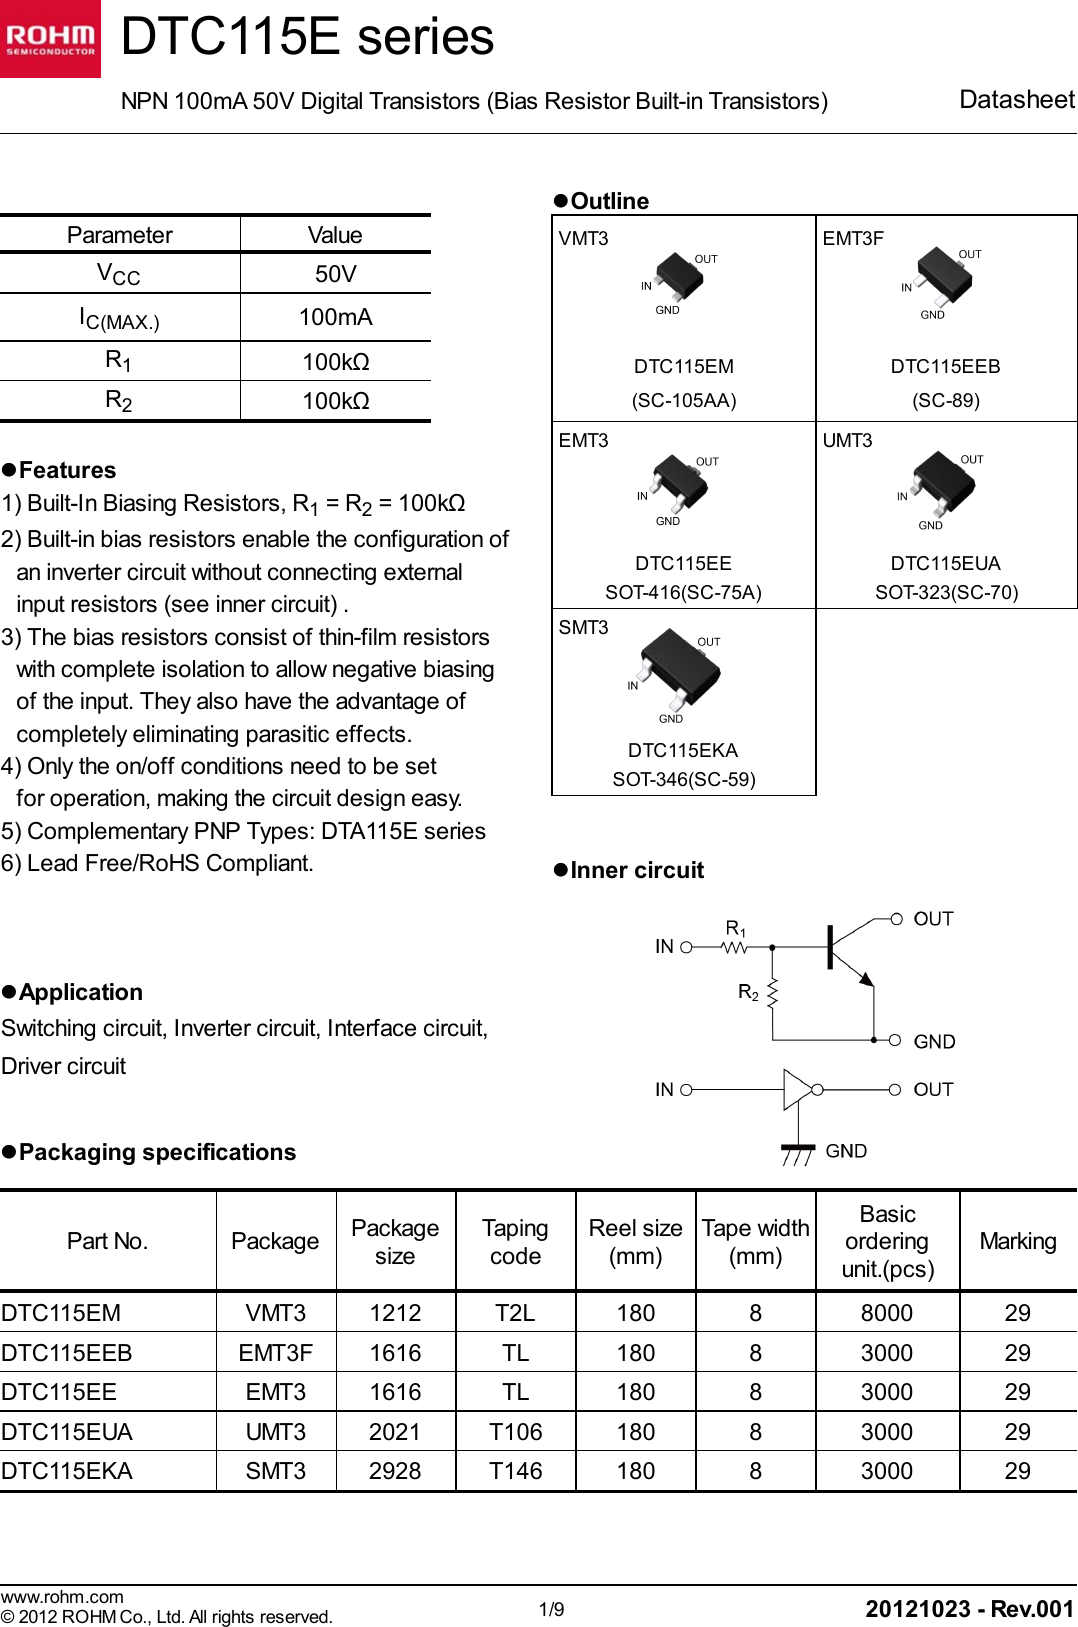 Page 1 of 11 - DTC115E Series - Datasheet. Www.s-manuals.com. Rohm